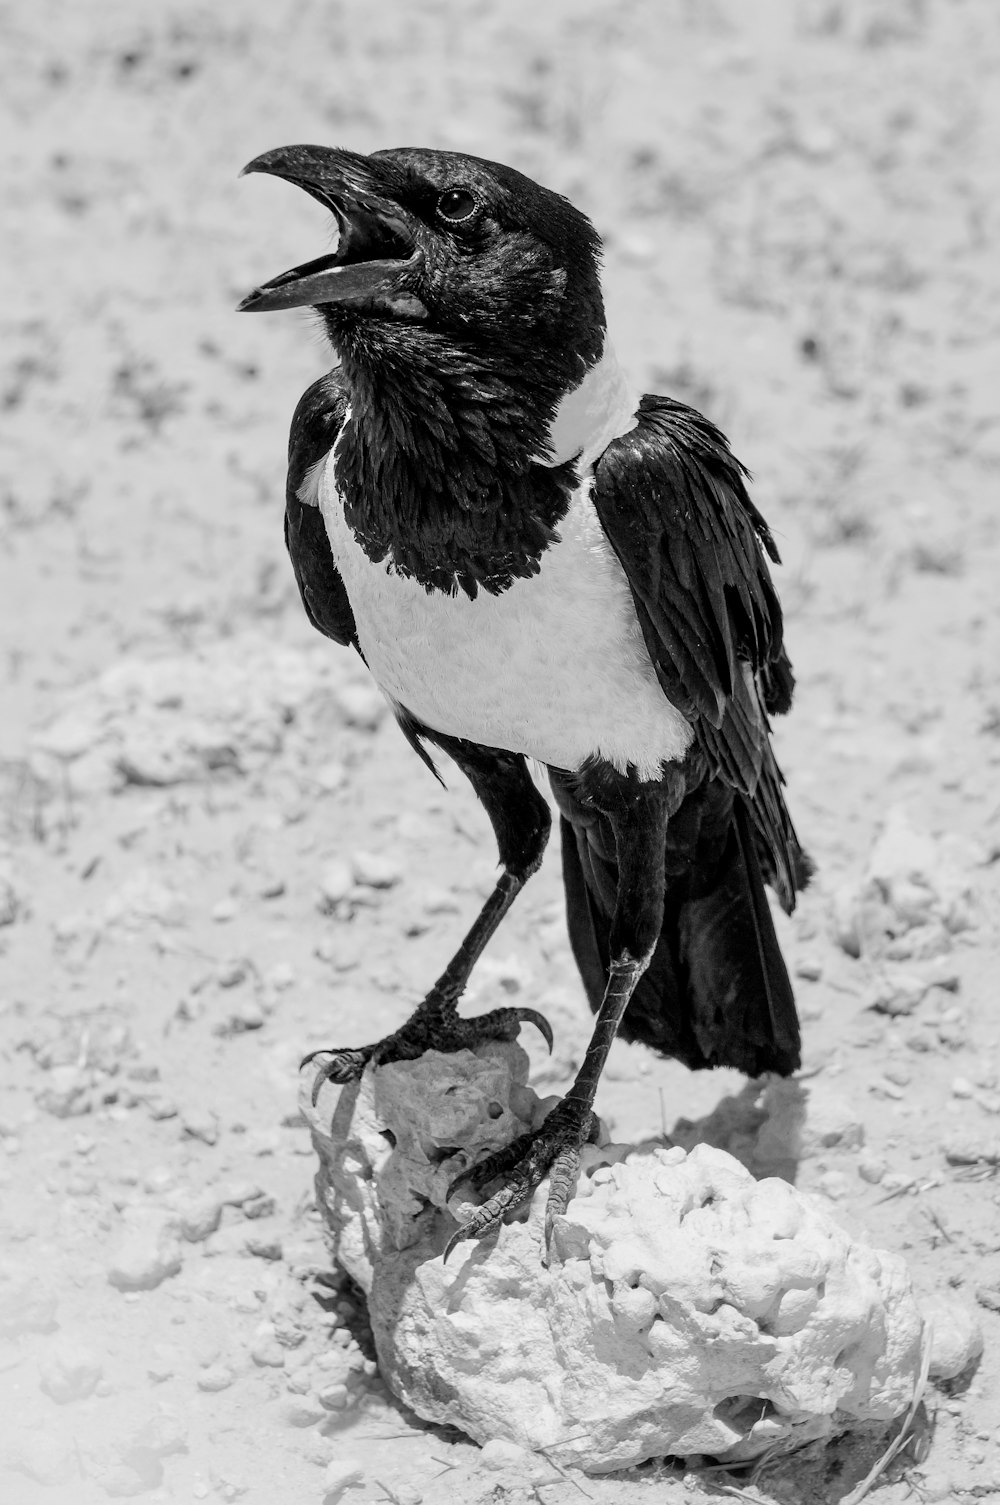 a black and white bird standing on a rock